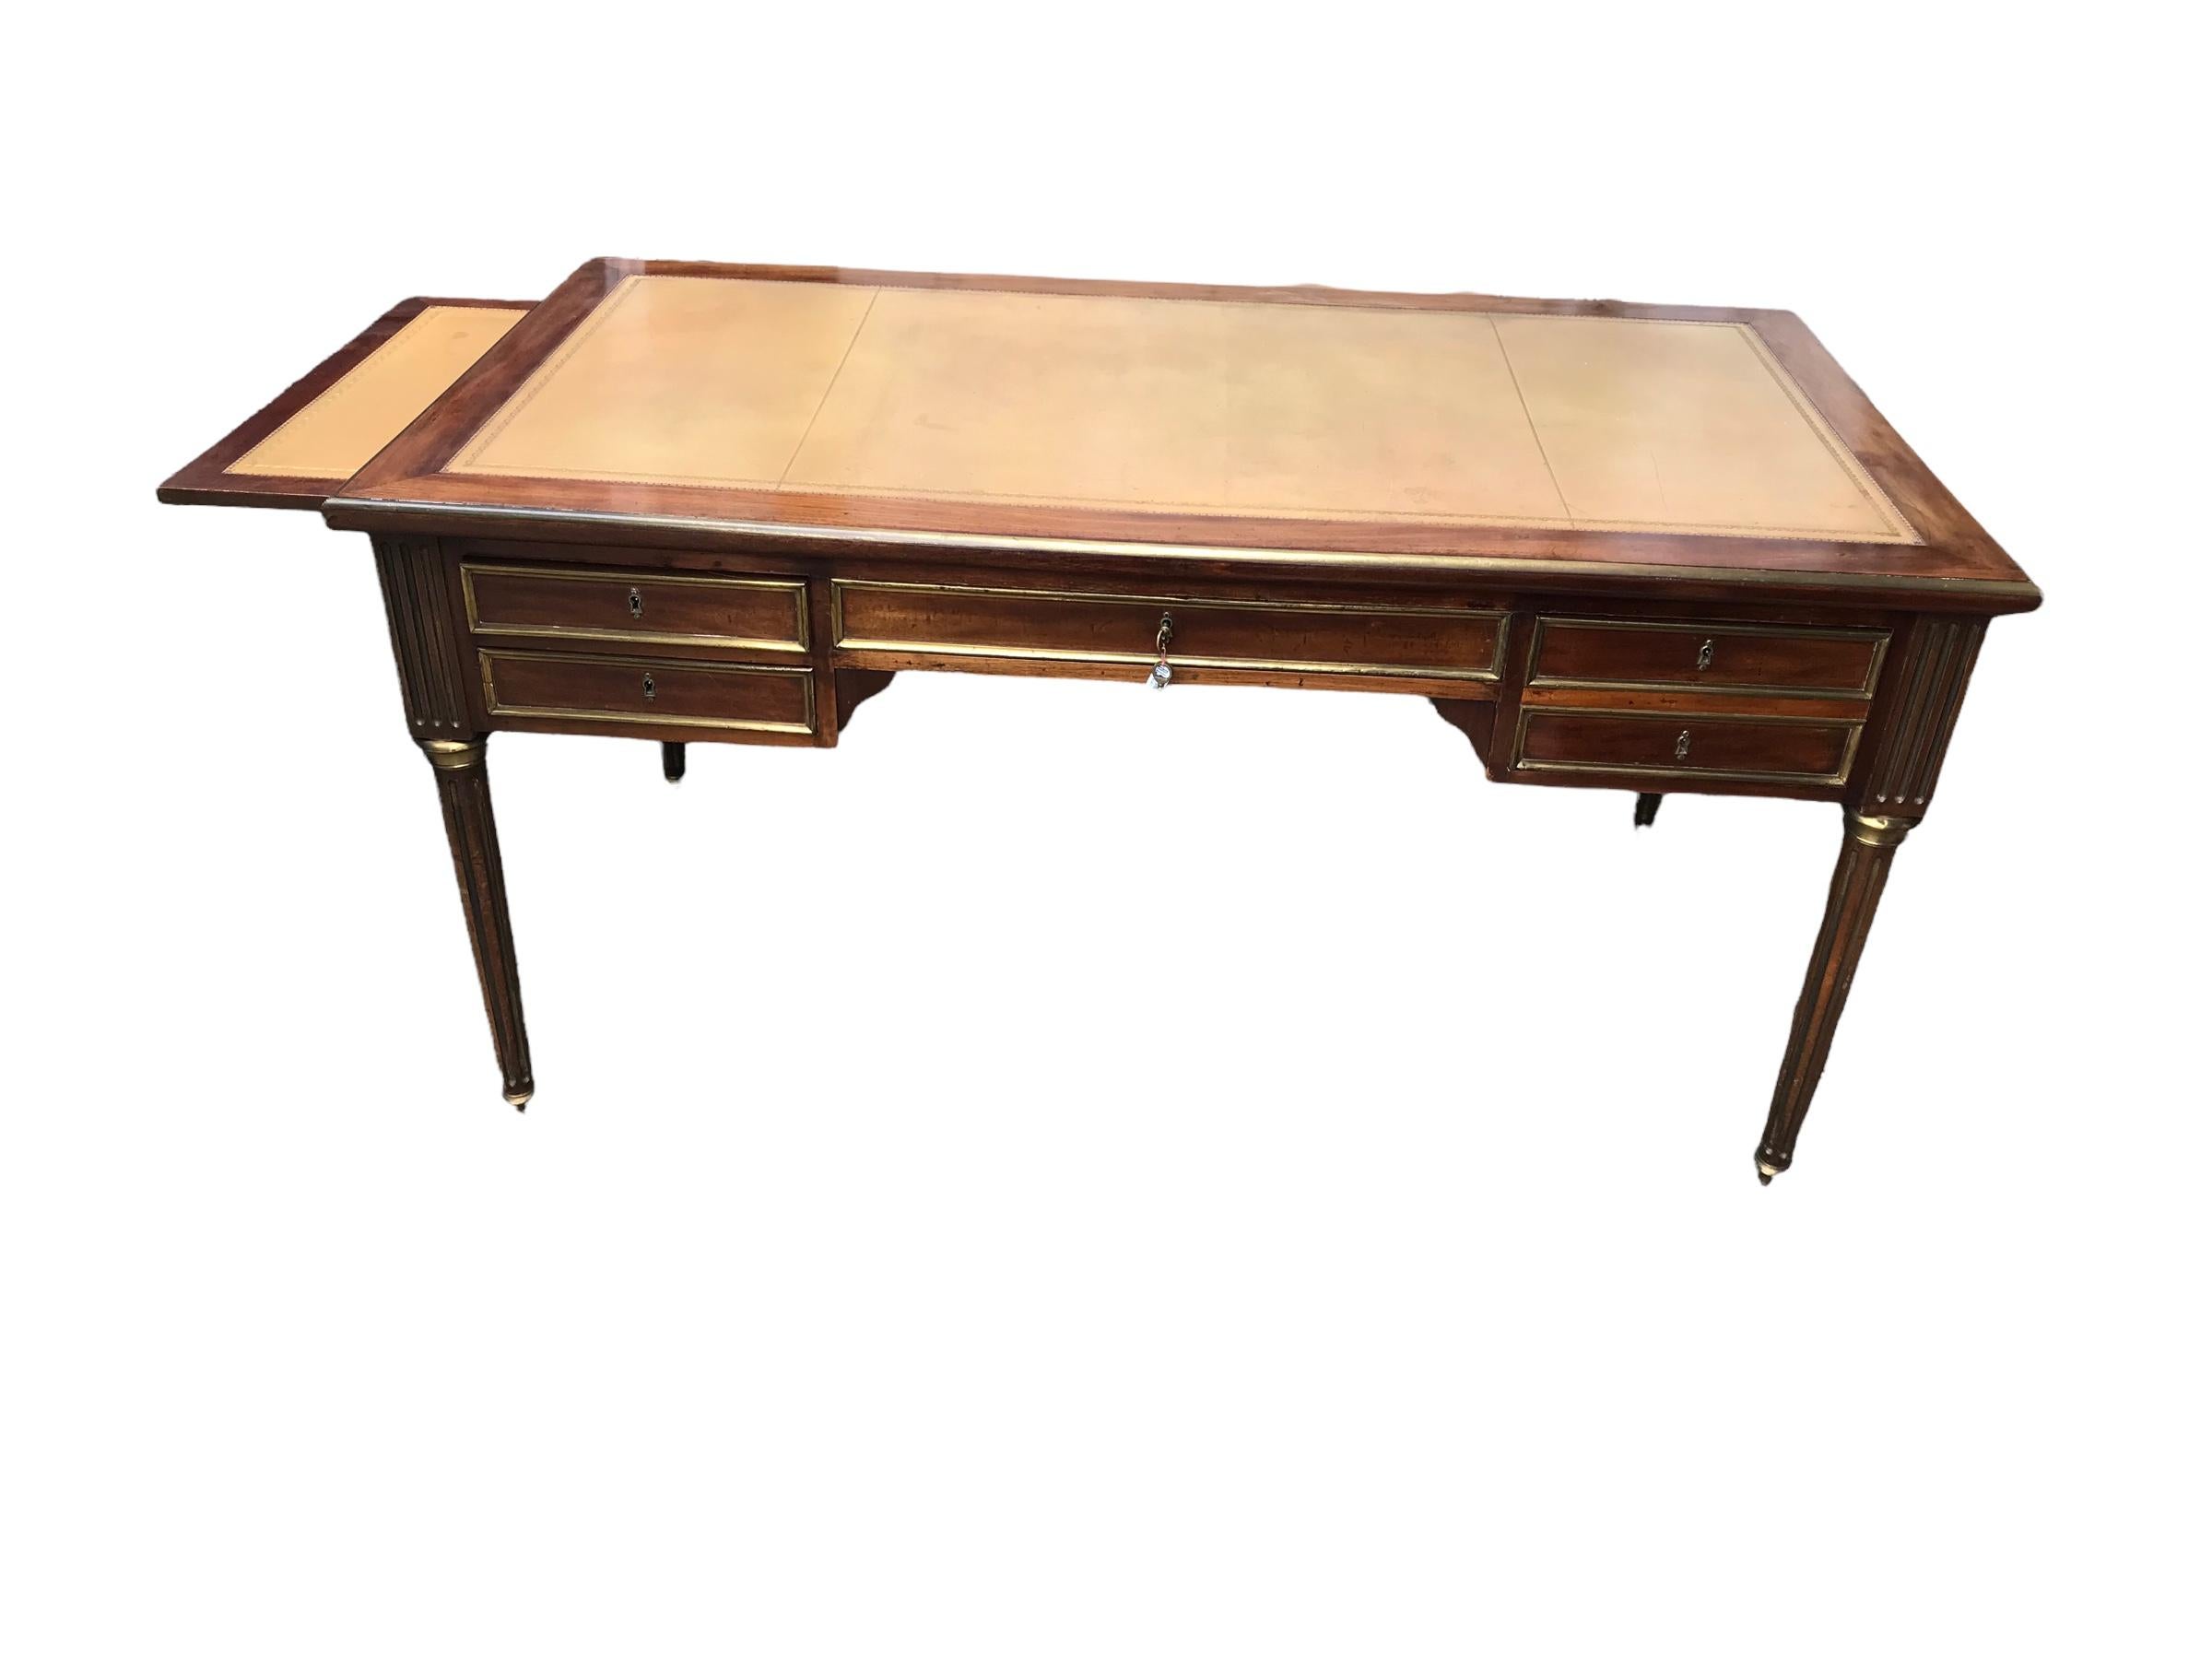 This elegant Directoire style desk dates back to the second half of the 19th century. The desk has a pretty mahogany veneer and is additionally embellished with brass fillets. The top is covered with light brown leather and has two additional